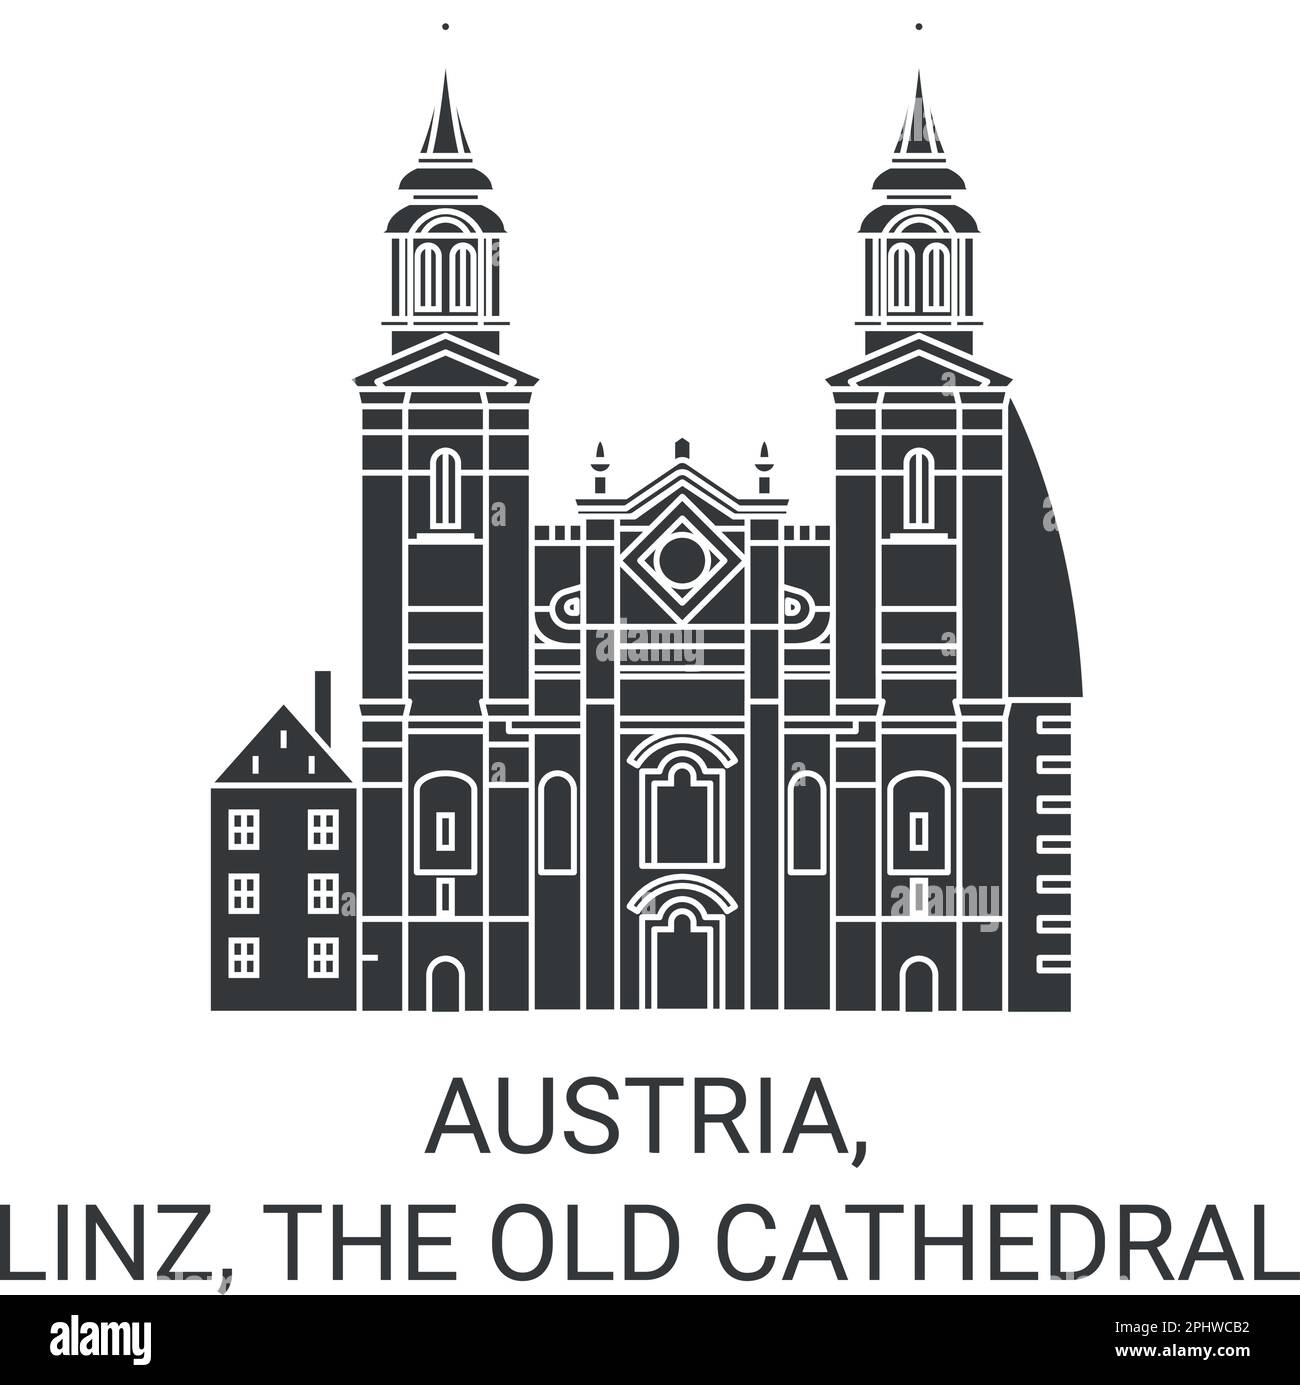 Austria, Linz, The Old Cathedral travel landmark vector illustration Stock Vector